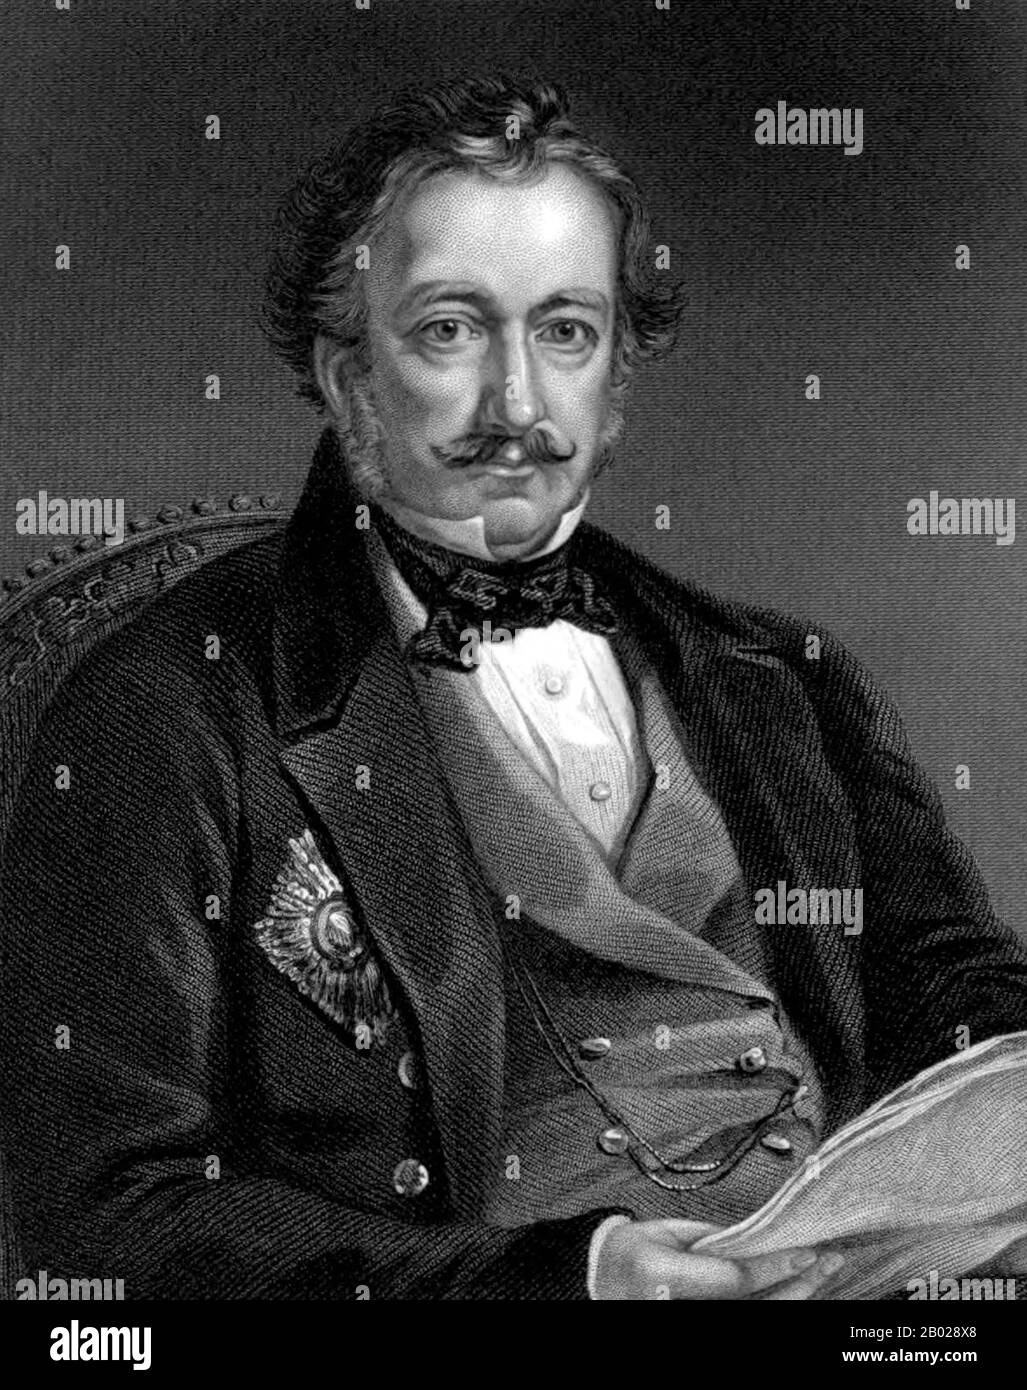 Lieutenant General Sir Henry Pottinger, 1st Baronet, GCB, PC (Chinese: 砵甸乍; 3 October 1789 – 18 March 1856), was an Anglo-Irish soldier and colonial administrator who became the first Governor of Hong Kong.  Pottinger accepted Foreign Secretary Lord Palmerston's offer of the post of envoy and plenipotentiary in China and superintendent of British trade, thus replacing Charles Elliot. In 1841, when Pottinger was sent to China, Palmerston instructed him to 'examine with care the natural capacities of Hong Kong, and you will not agree to give up that Island unless you should find that you can exc Stock Photo